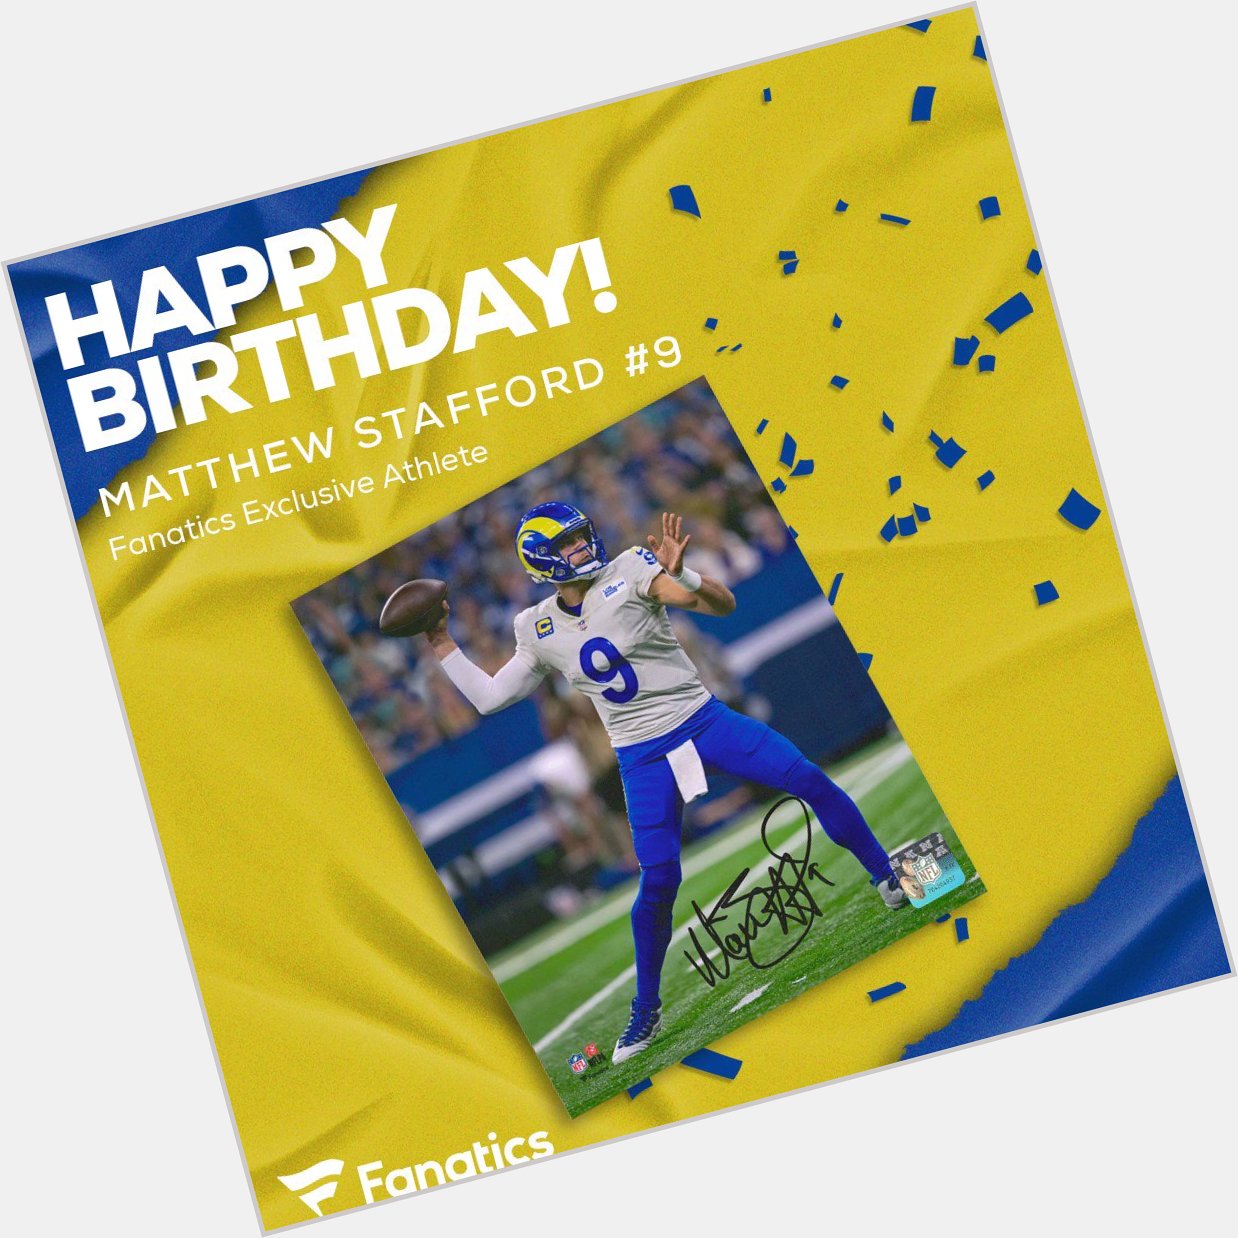 Happy Birthday shoutout to NFC champ and athlete Matthew Stafford!  